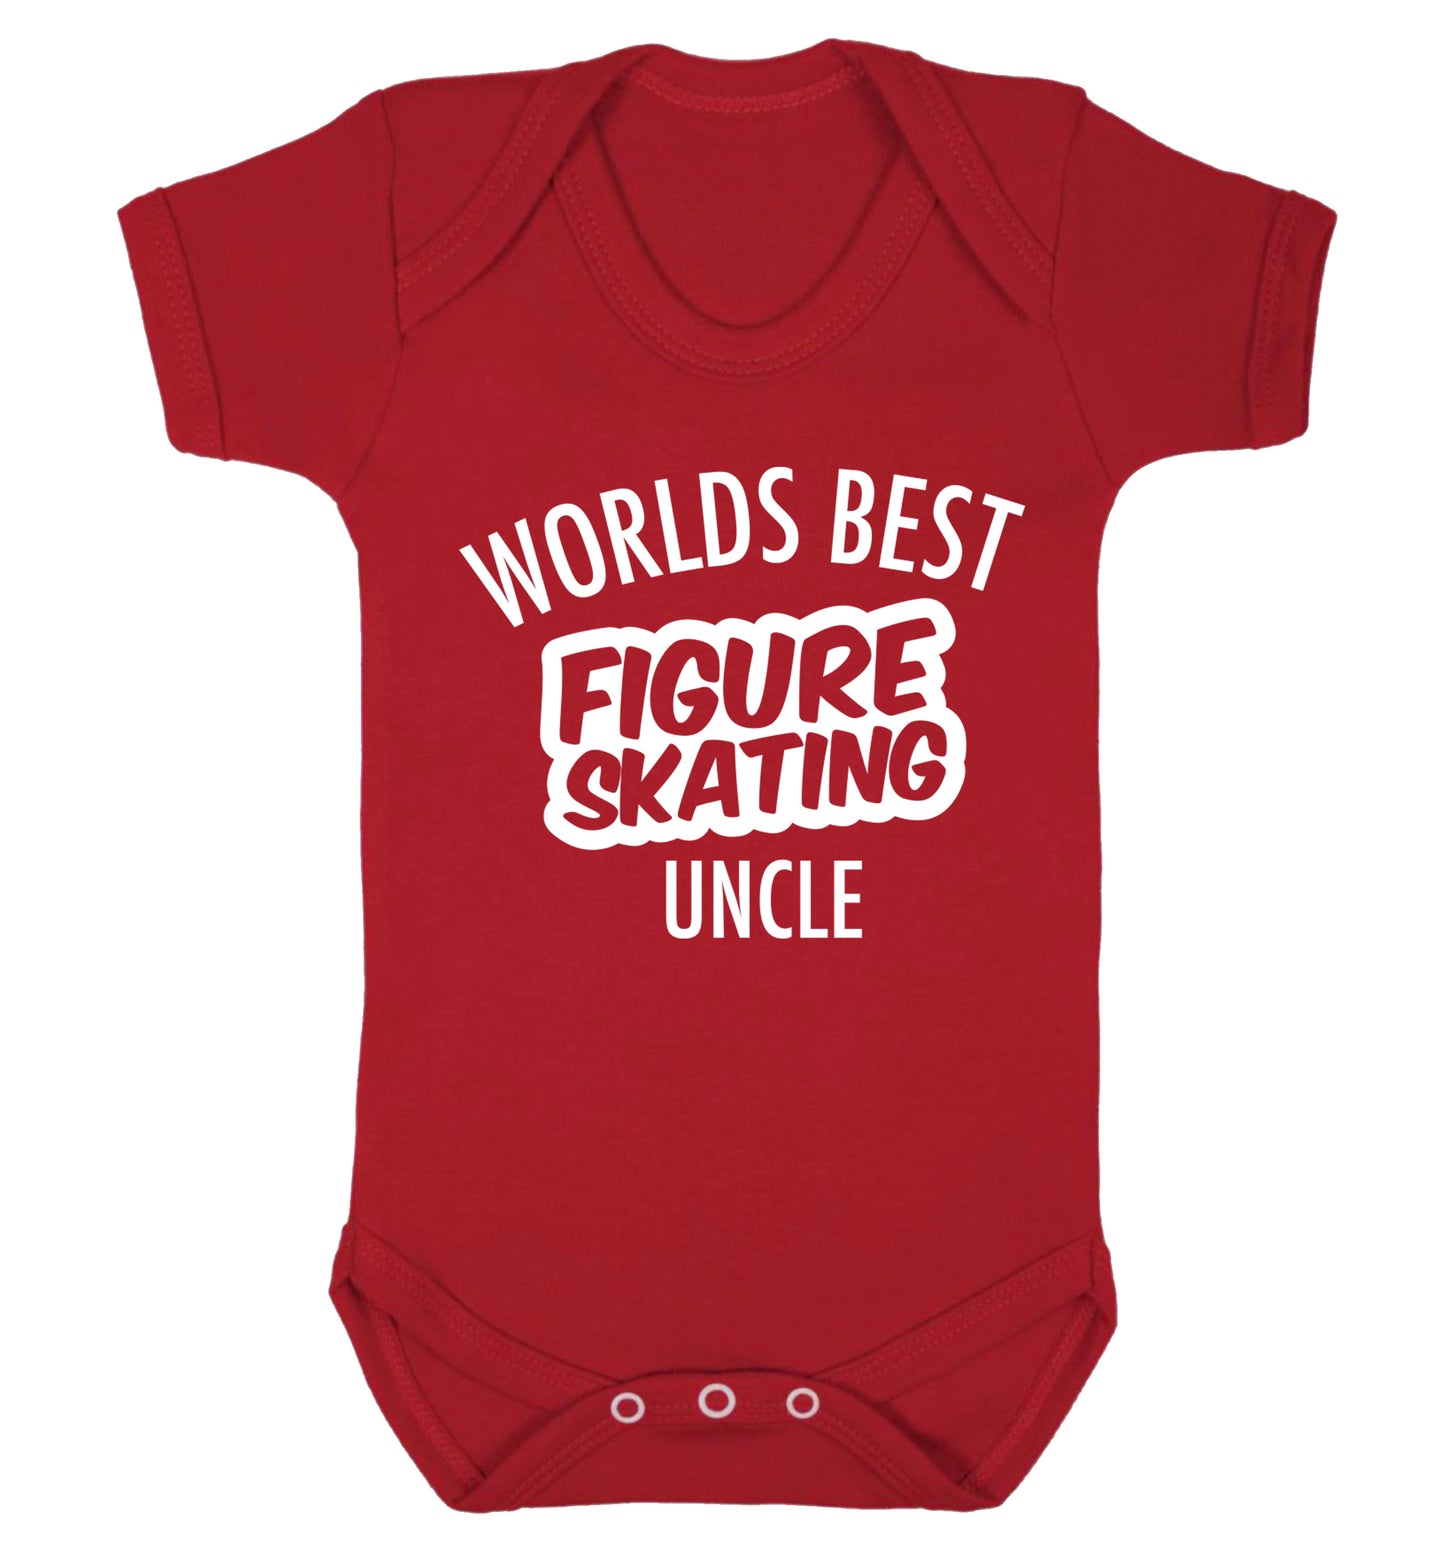 Worlds best figure skating uncle Baby Vest red 18-24 months